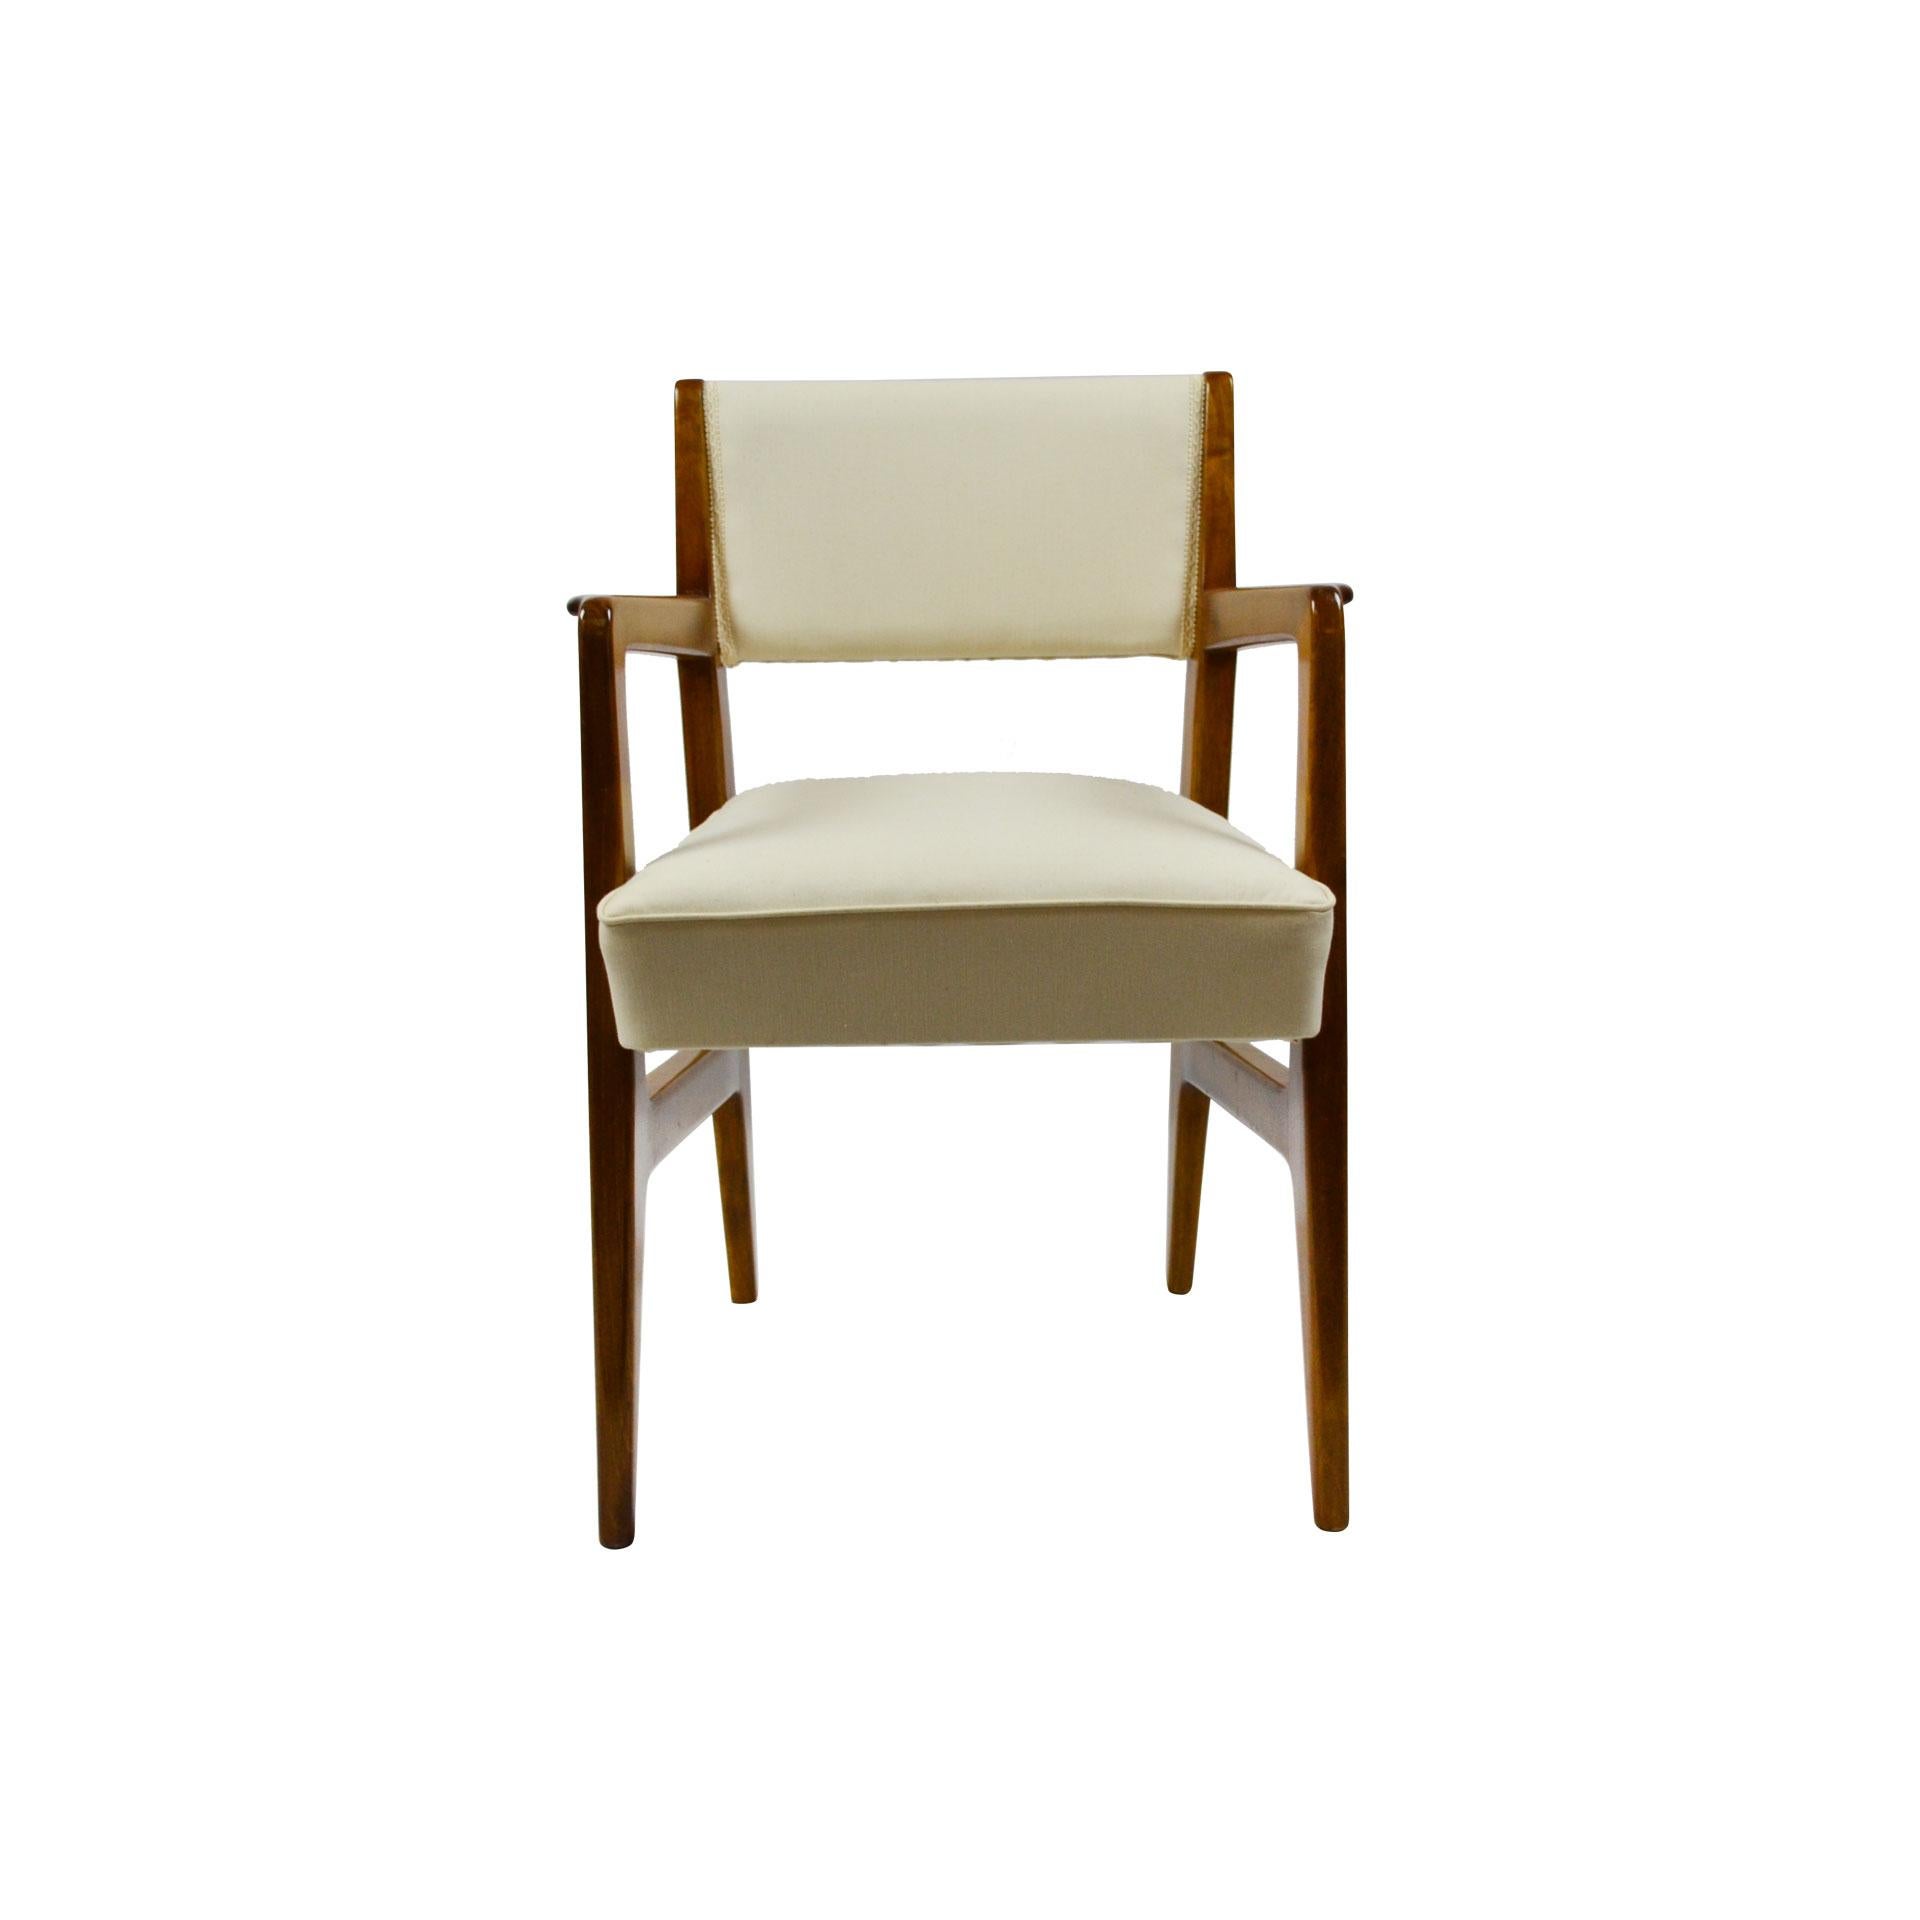 Italian 20th Century Gio Ponti Six Chairs Designed for Augustus Motorboat by Cassina